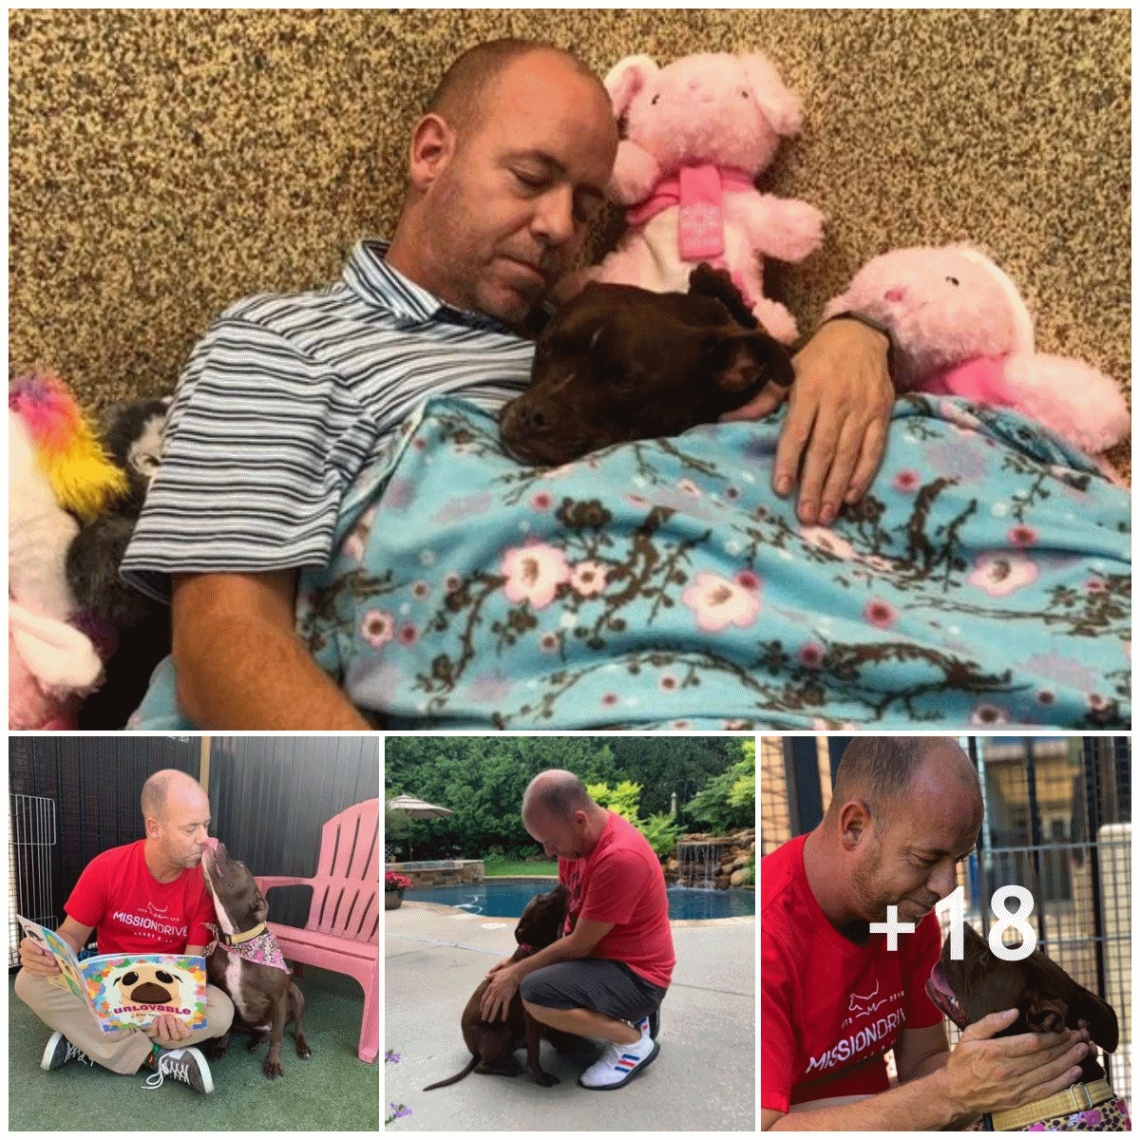 The man went to the animal shelter to overcome his illness with his dog, a friendship that is not afraid of difficulties.